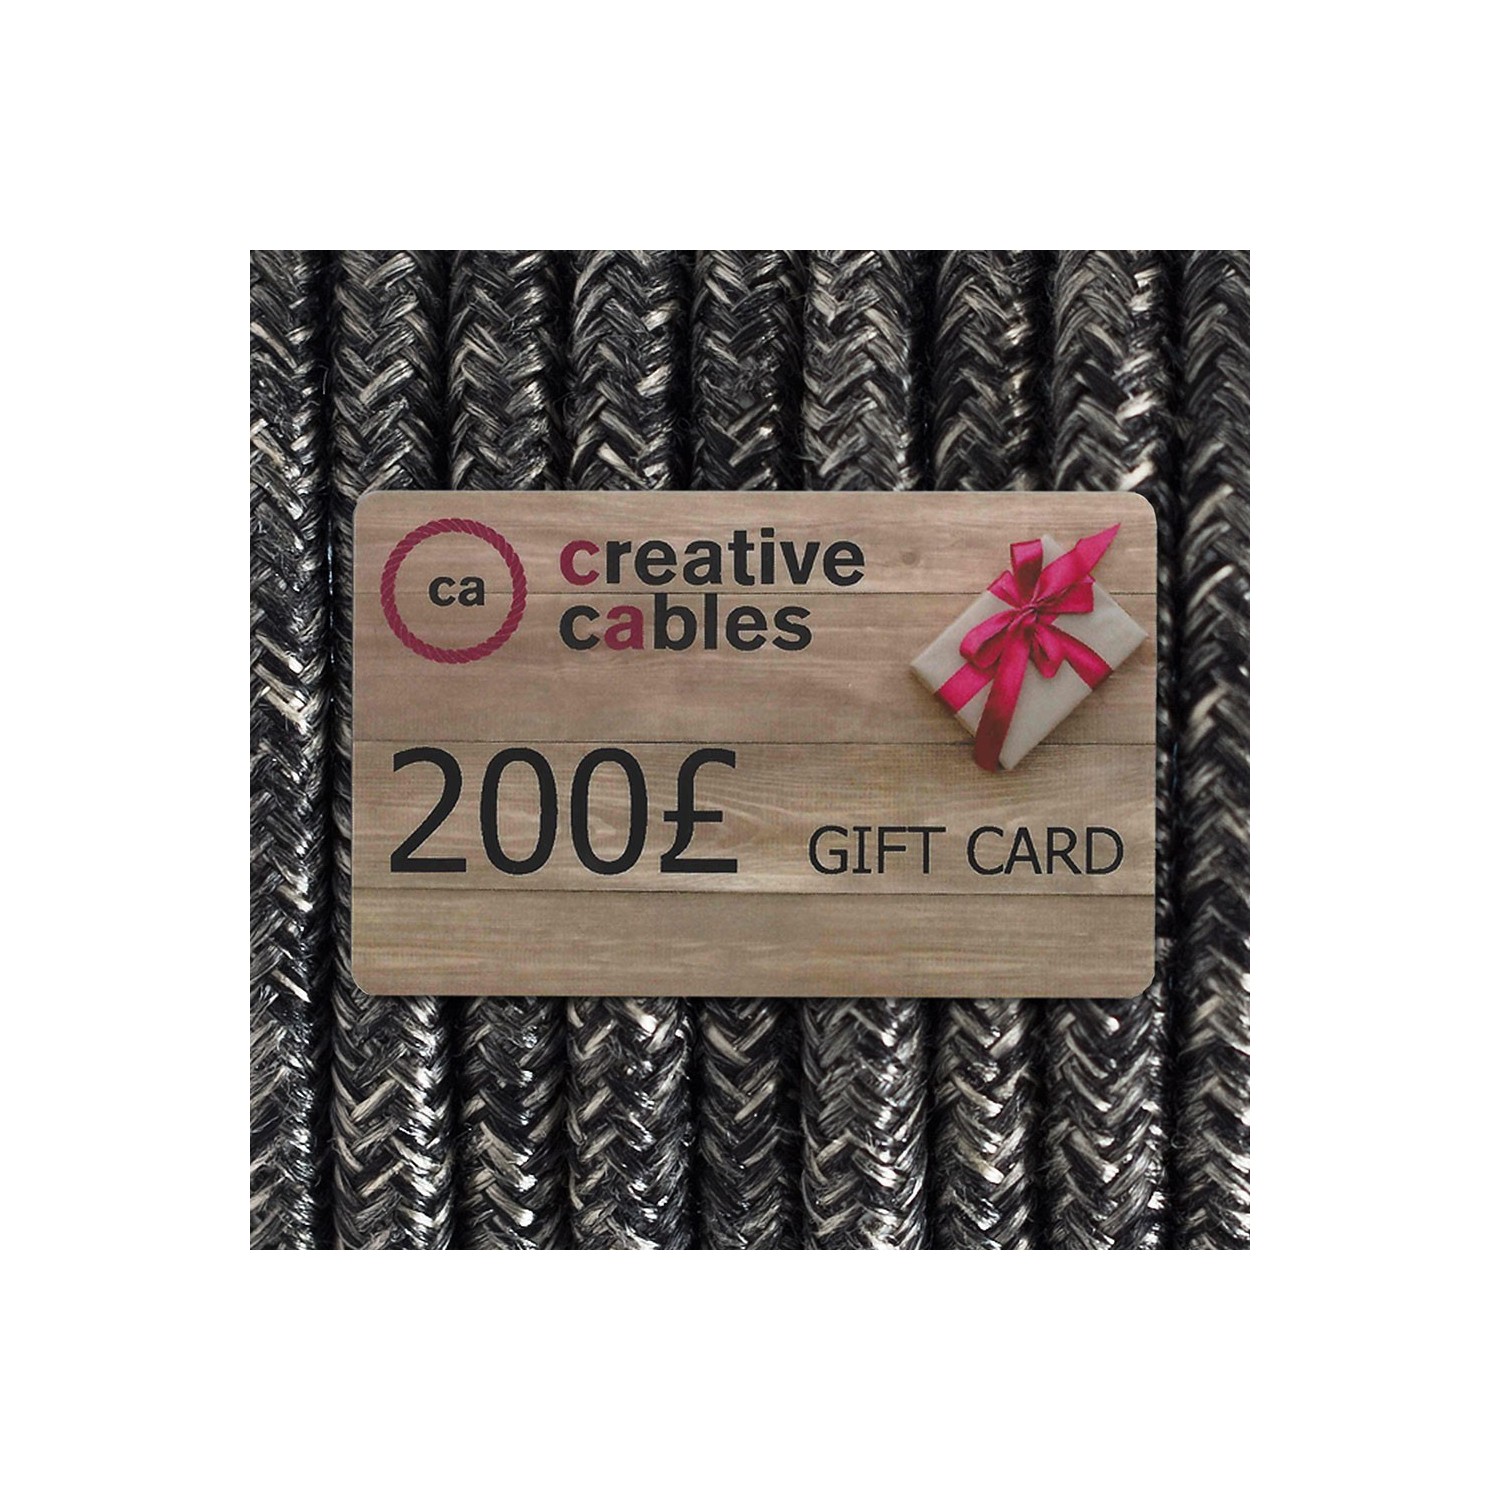 Gift Card, Creative-Cables 200 Pounds